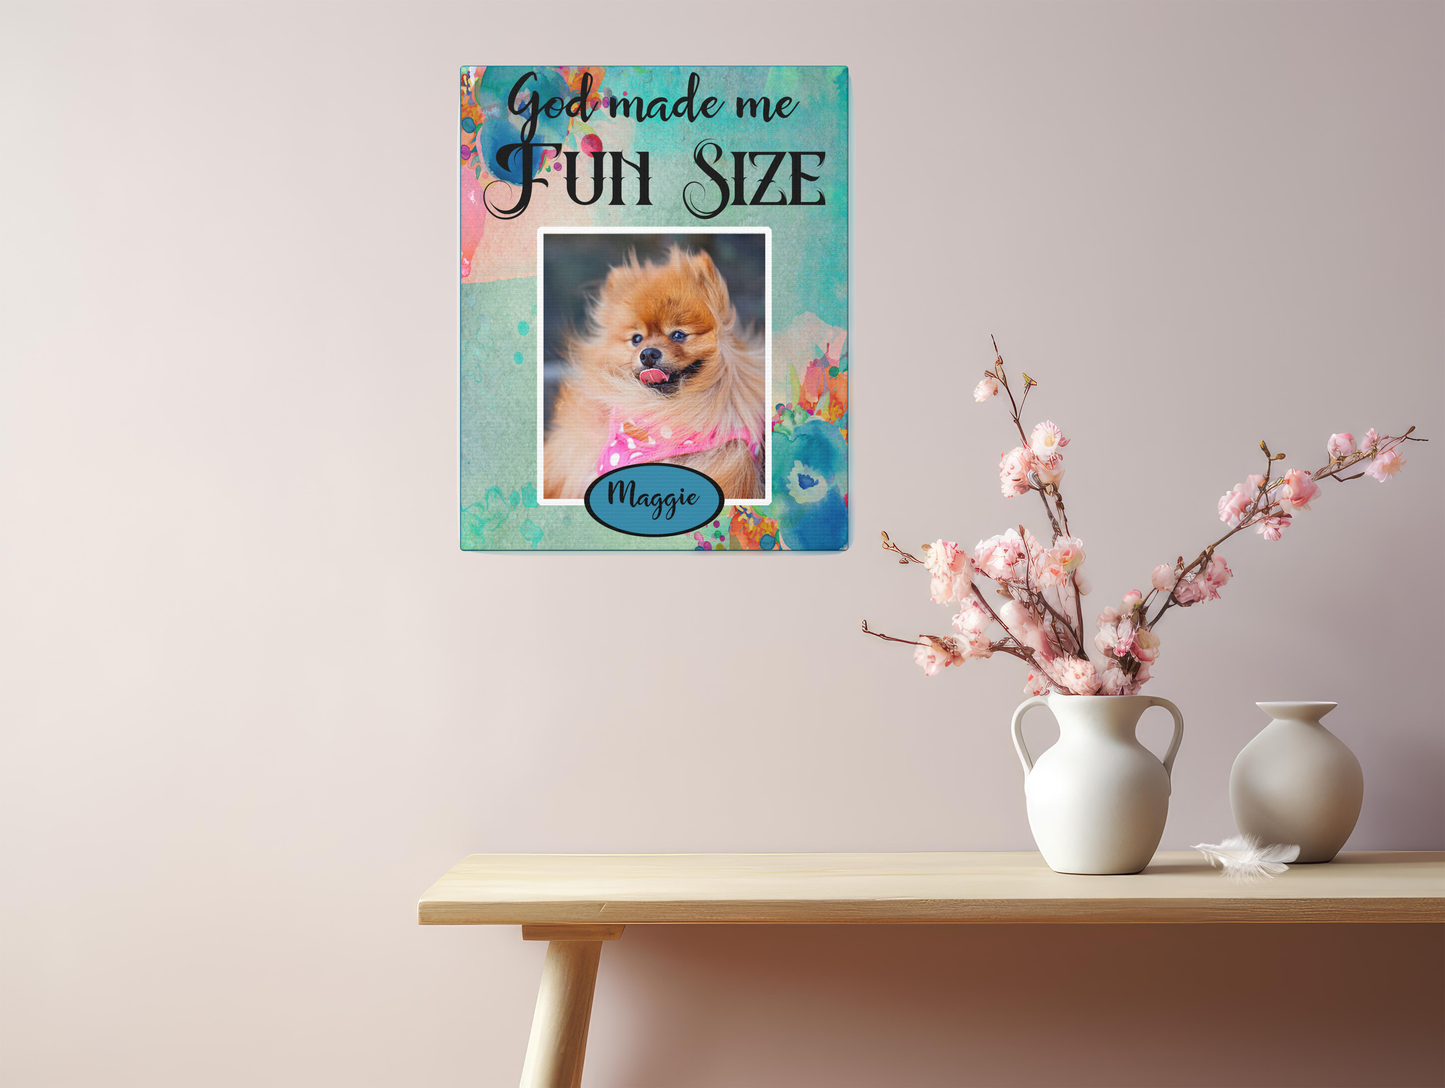 Personalized Dog Wall Art Fun Size 8x10 Canvas Gallery Wraps FREE SHIPPING